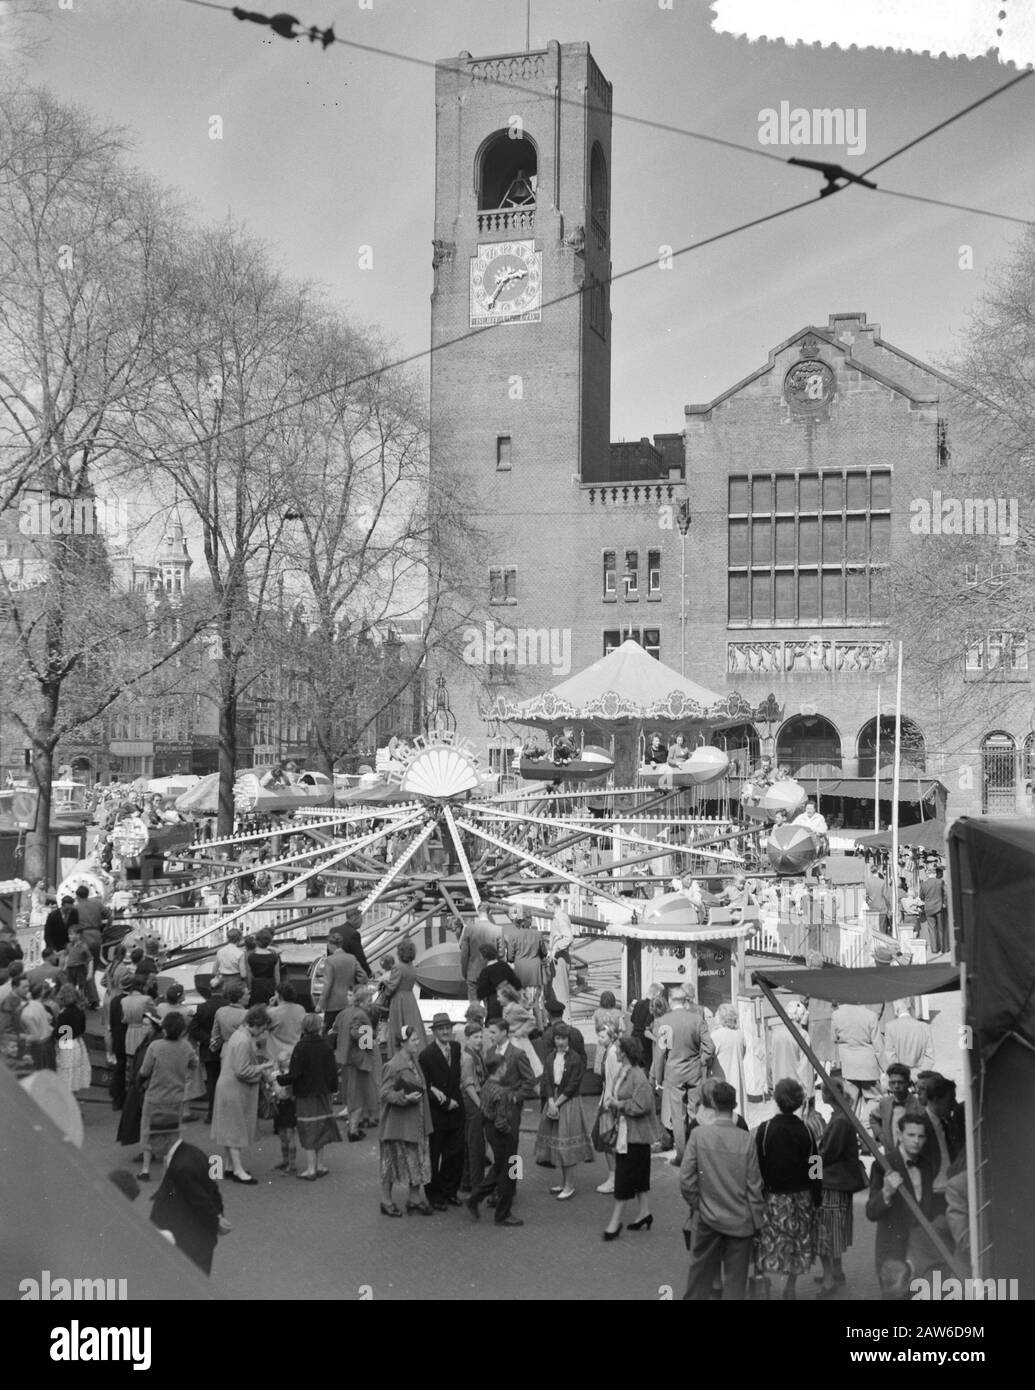 National Day; fair on Beursplein Amsterdam Annotation: The exhibition of architect H. P. Berlage was built between 1898 and 1903 Date: May 5, 1956 Location: Amsterdam, Noord-Holland Keywords: trade fairs, carnivals Stock Photo